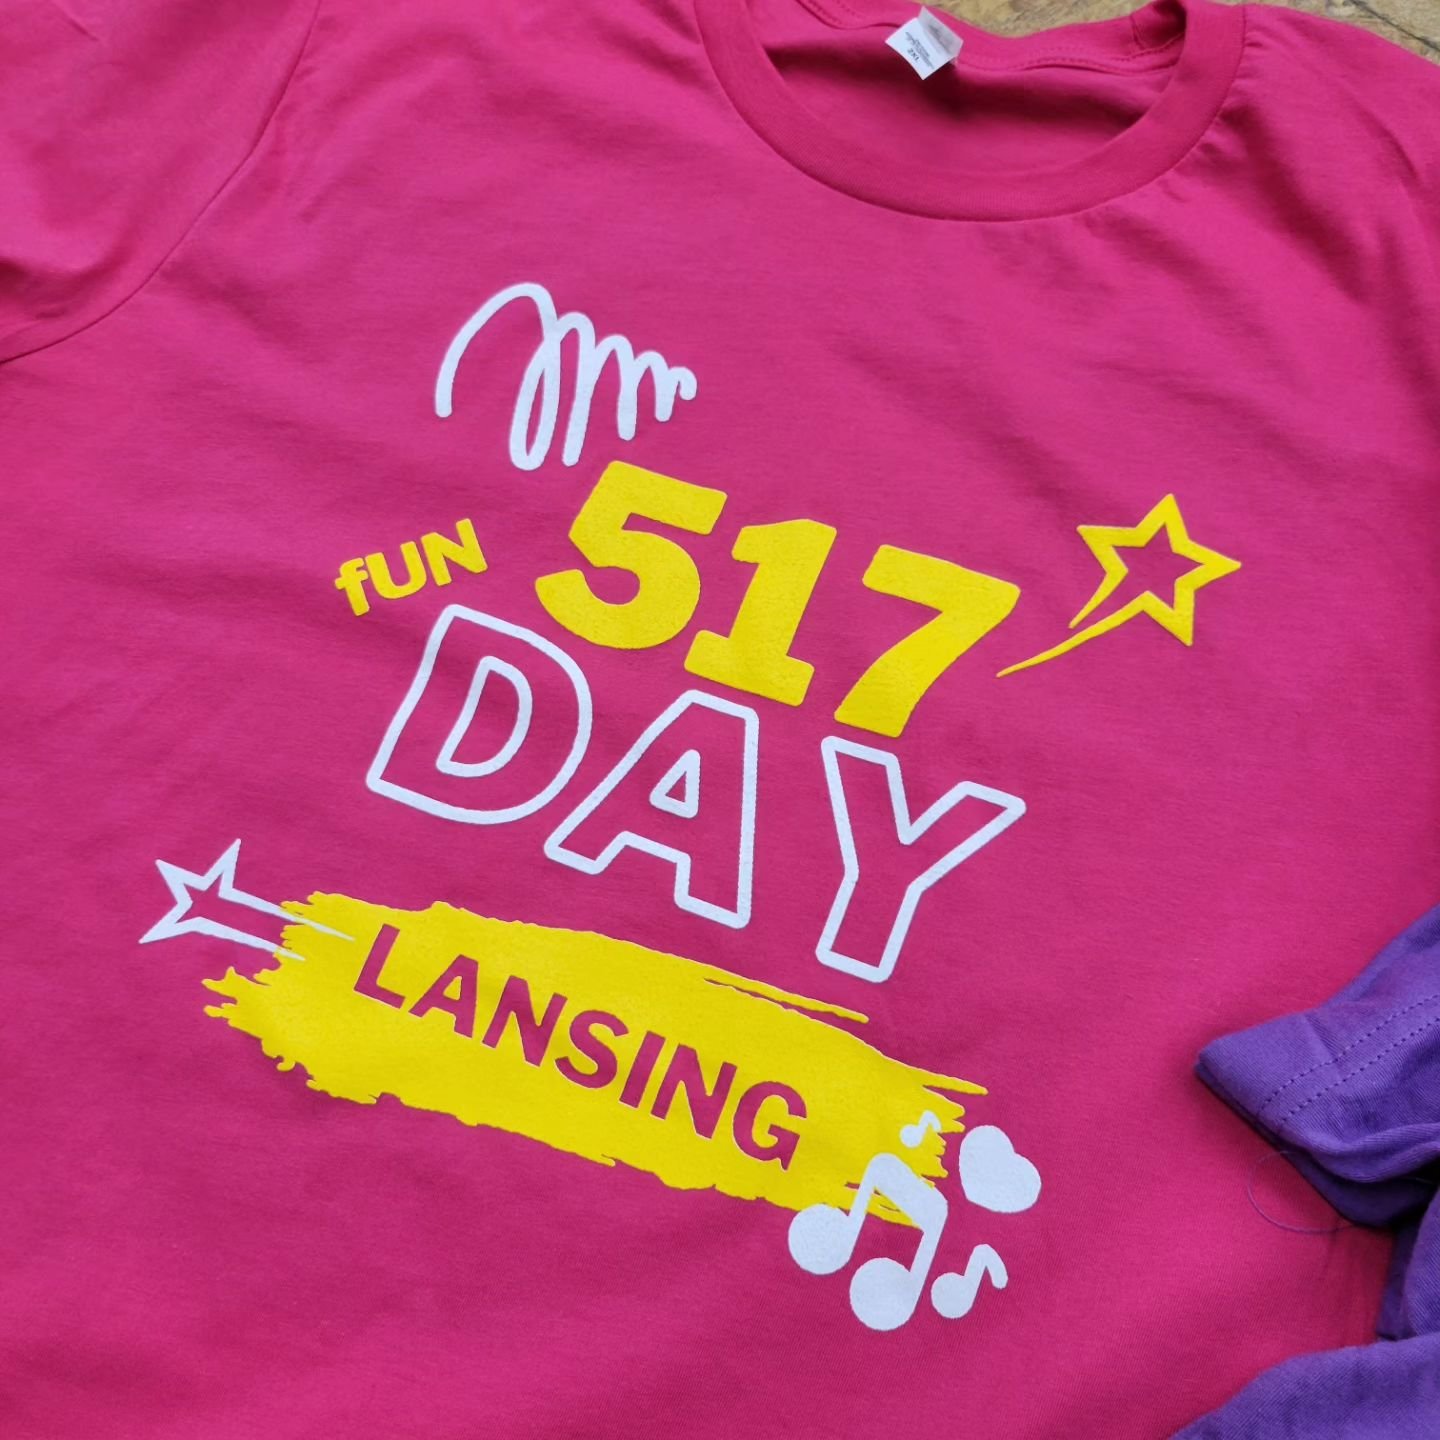 Happy 517 day! Join @metromelik517 and @lansing_shuffle today until 11pm for a 517 day celebration!